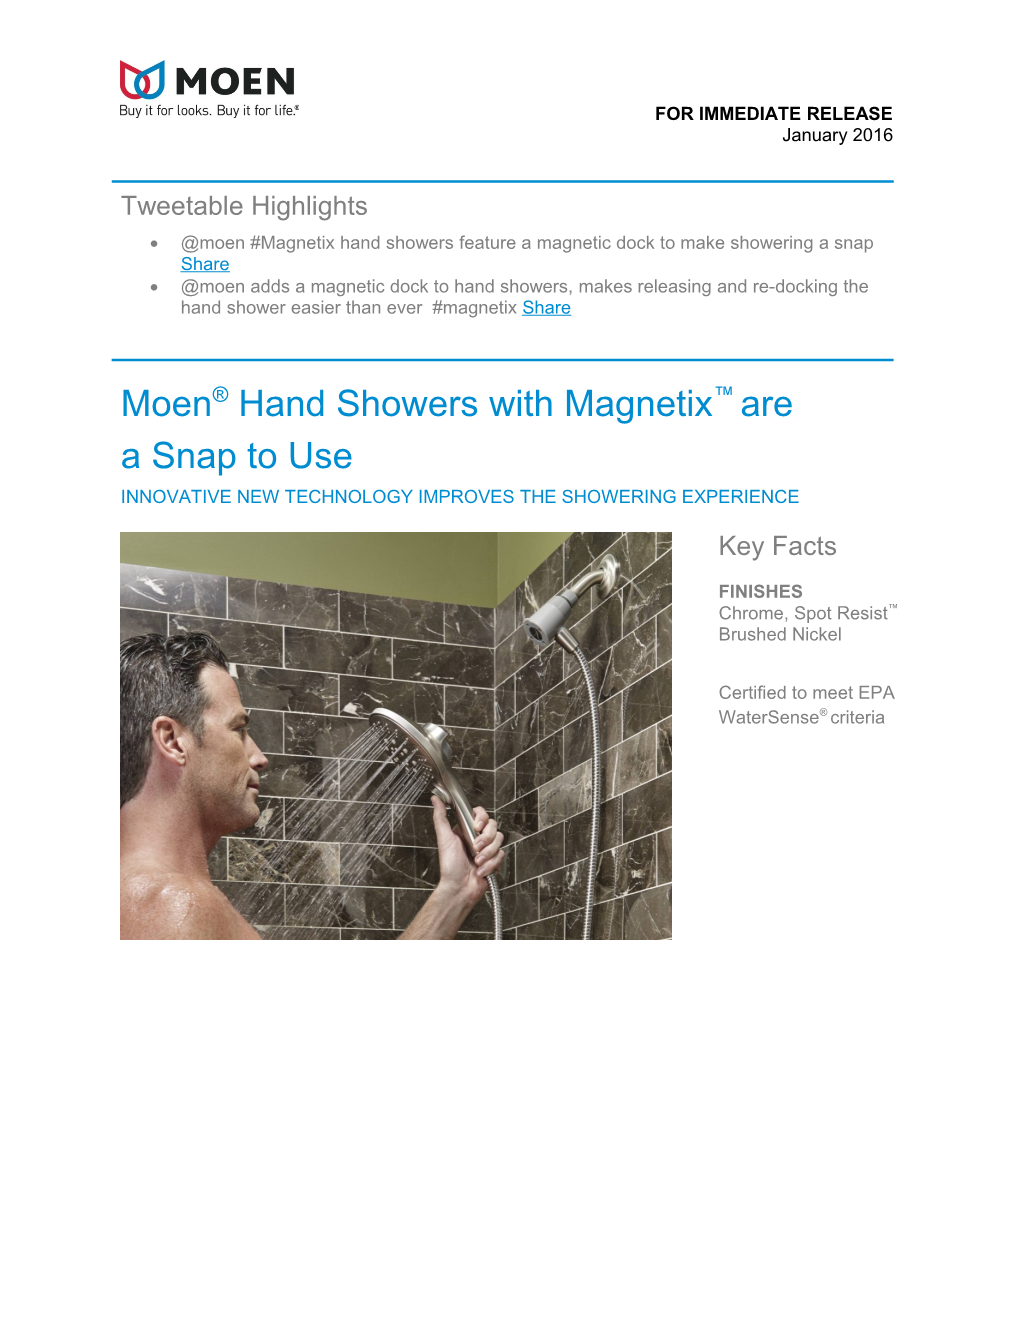 Moen #Magnetix Hand Showers Feature a Magnetic Dock to Make Showering a Snap Share